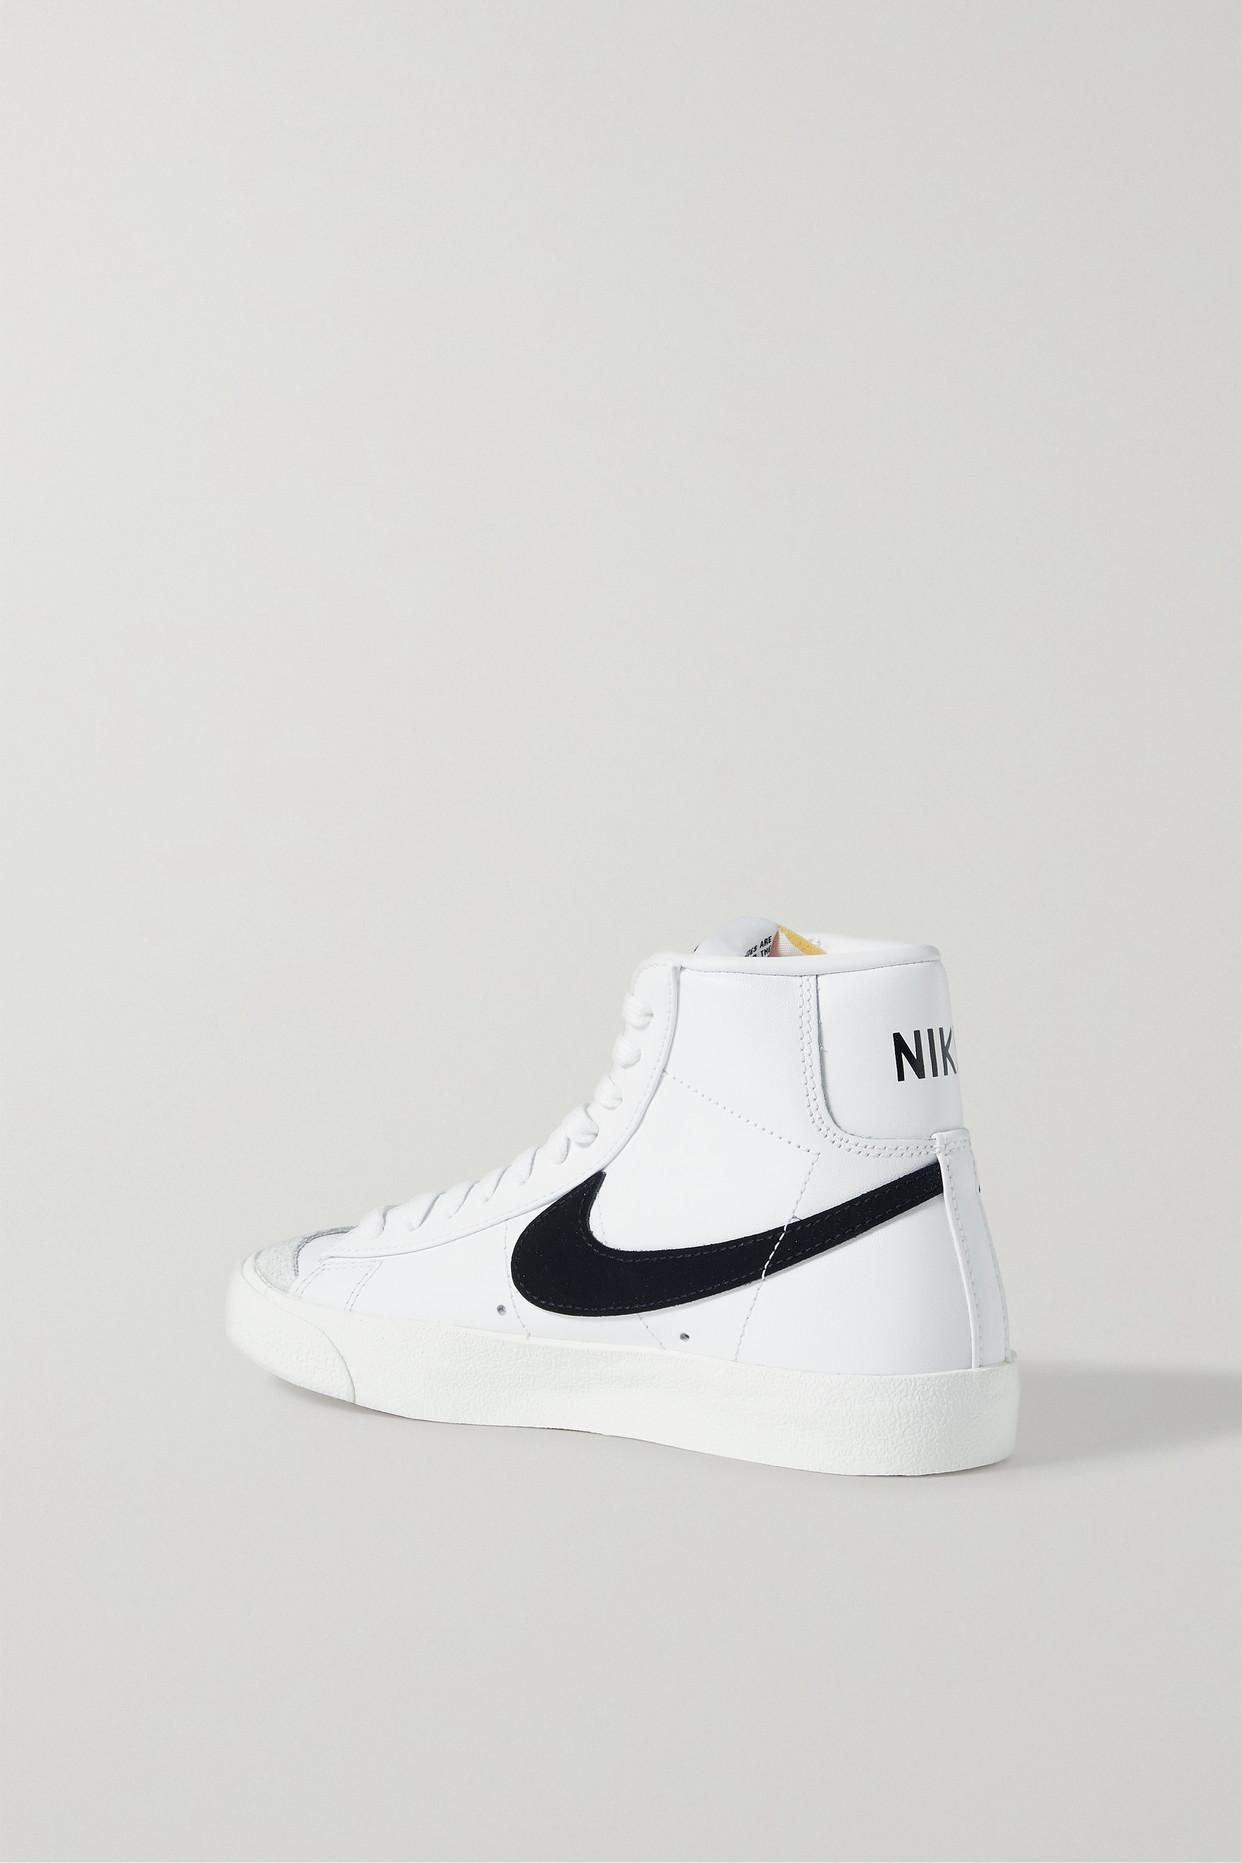 Nike Blazer Mid '77 Vintage Suede-trimmed Leather Sneakers in White | Lyst